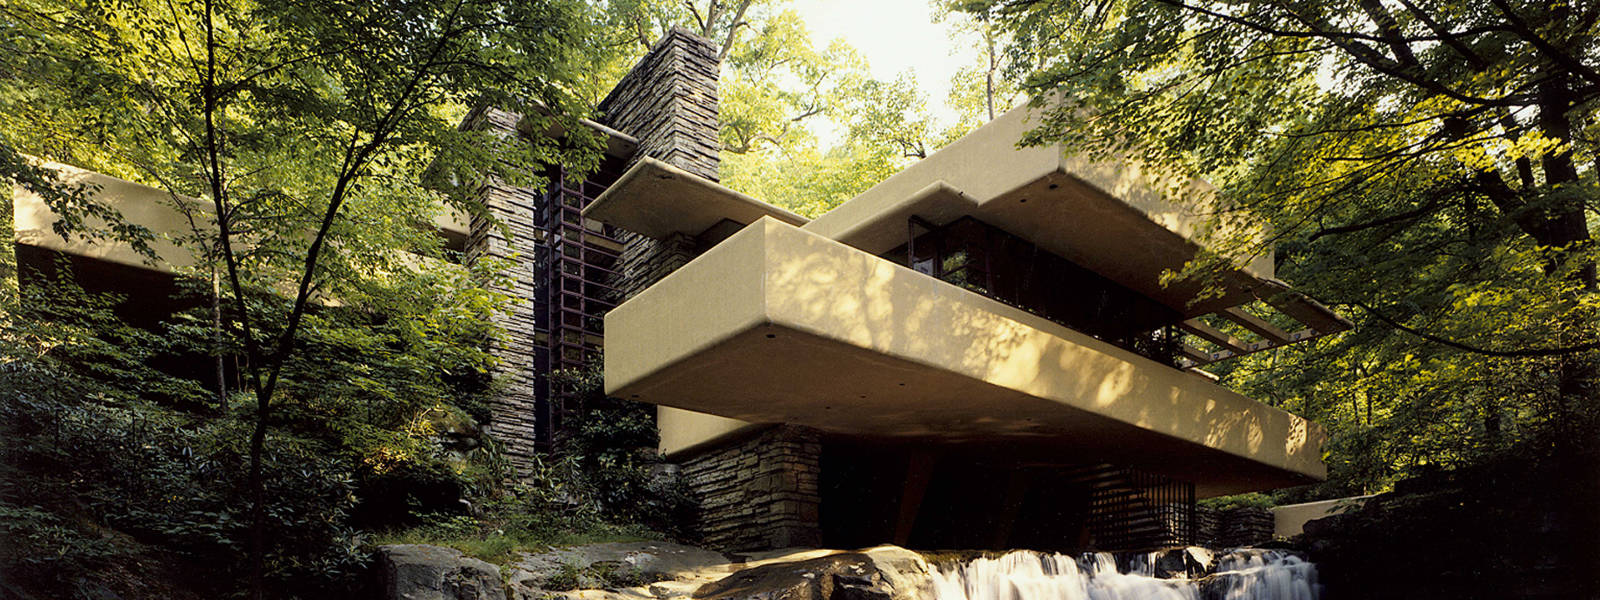 Press Release: Fallingwater to Host Hiring Event on Feb. 15